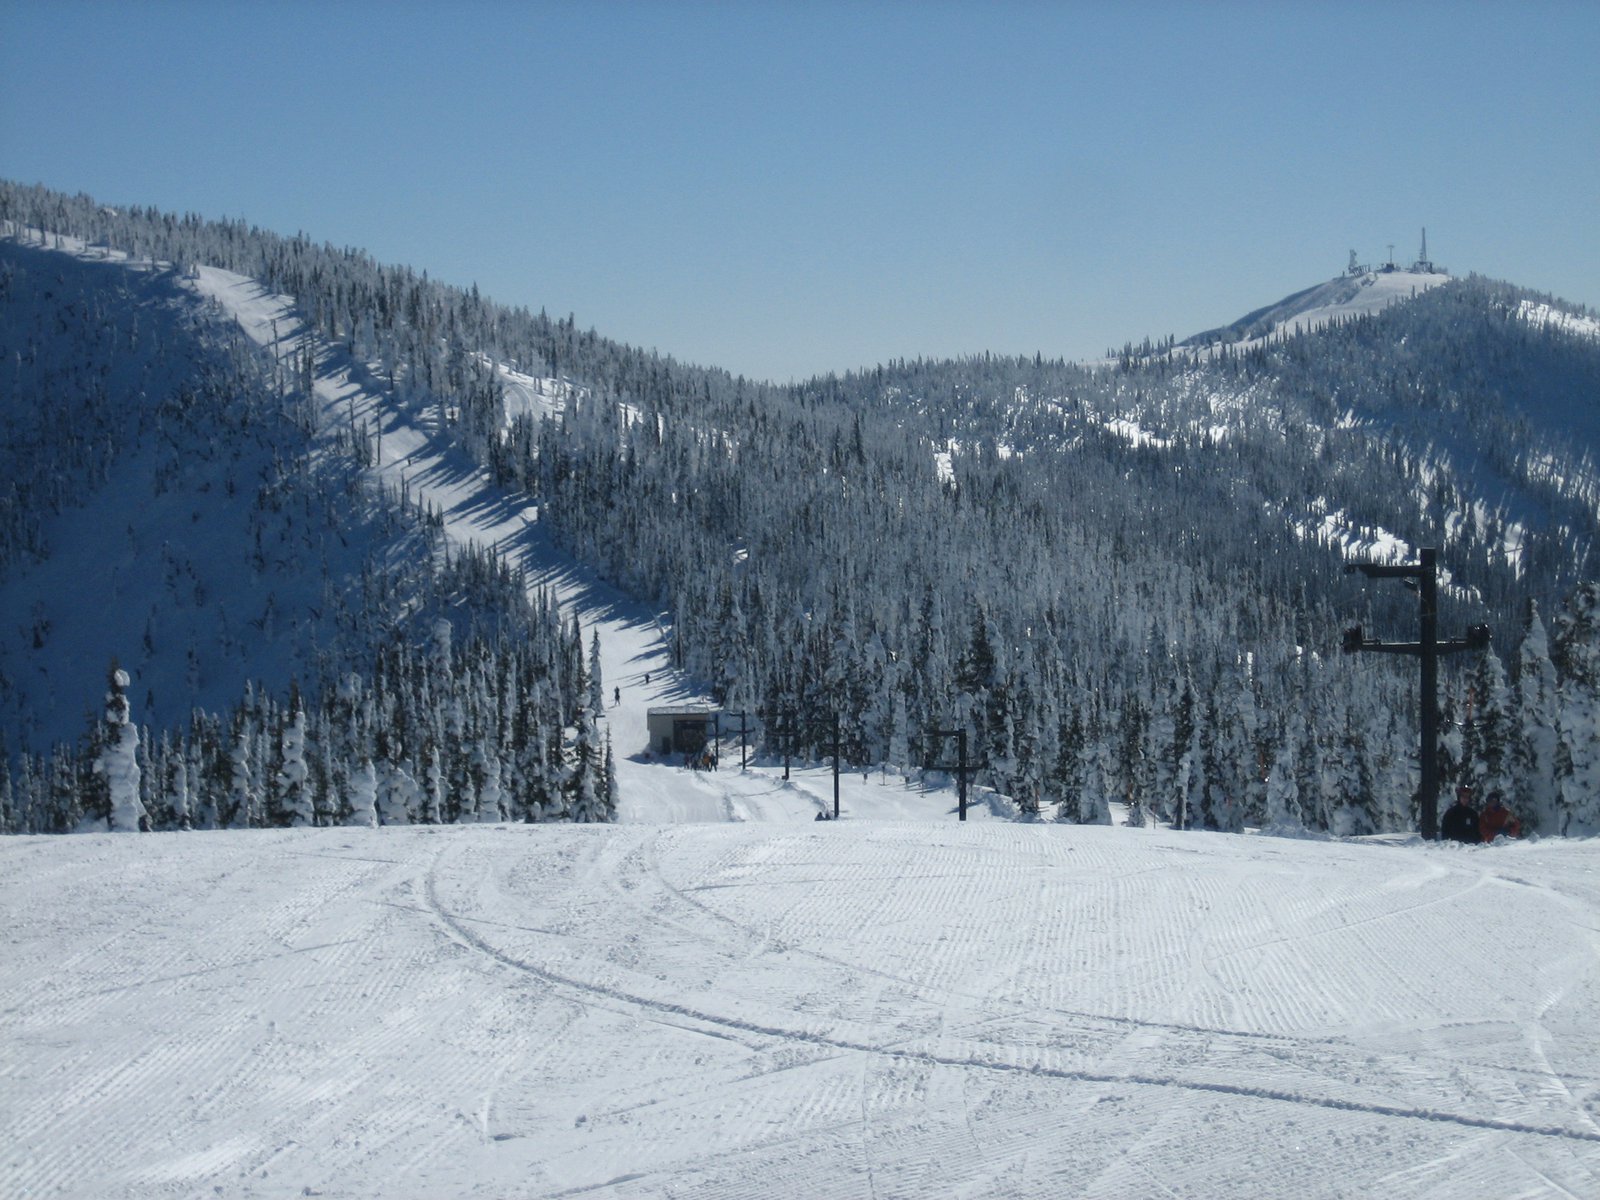 Looking Down at the Bottom of the Idyl-Our and Schweitzer Peak from Little Blue